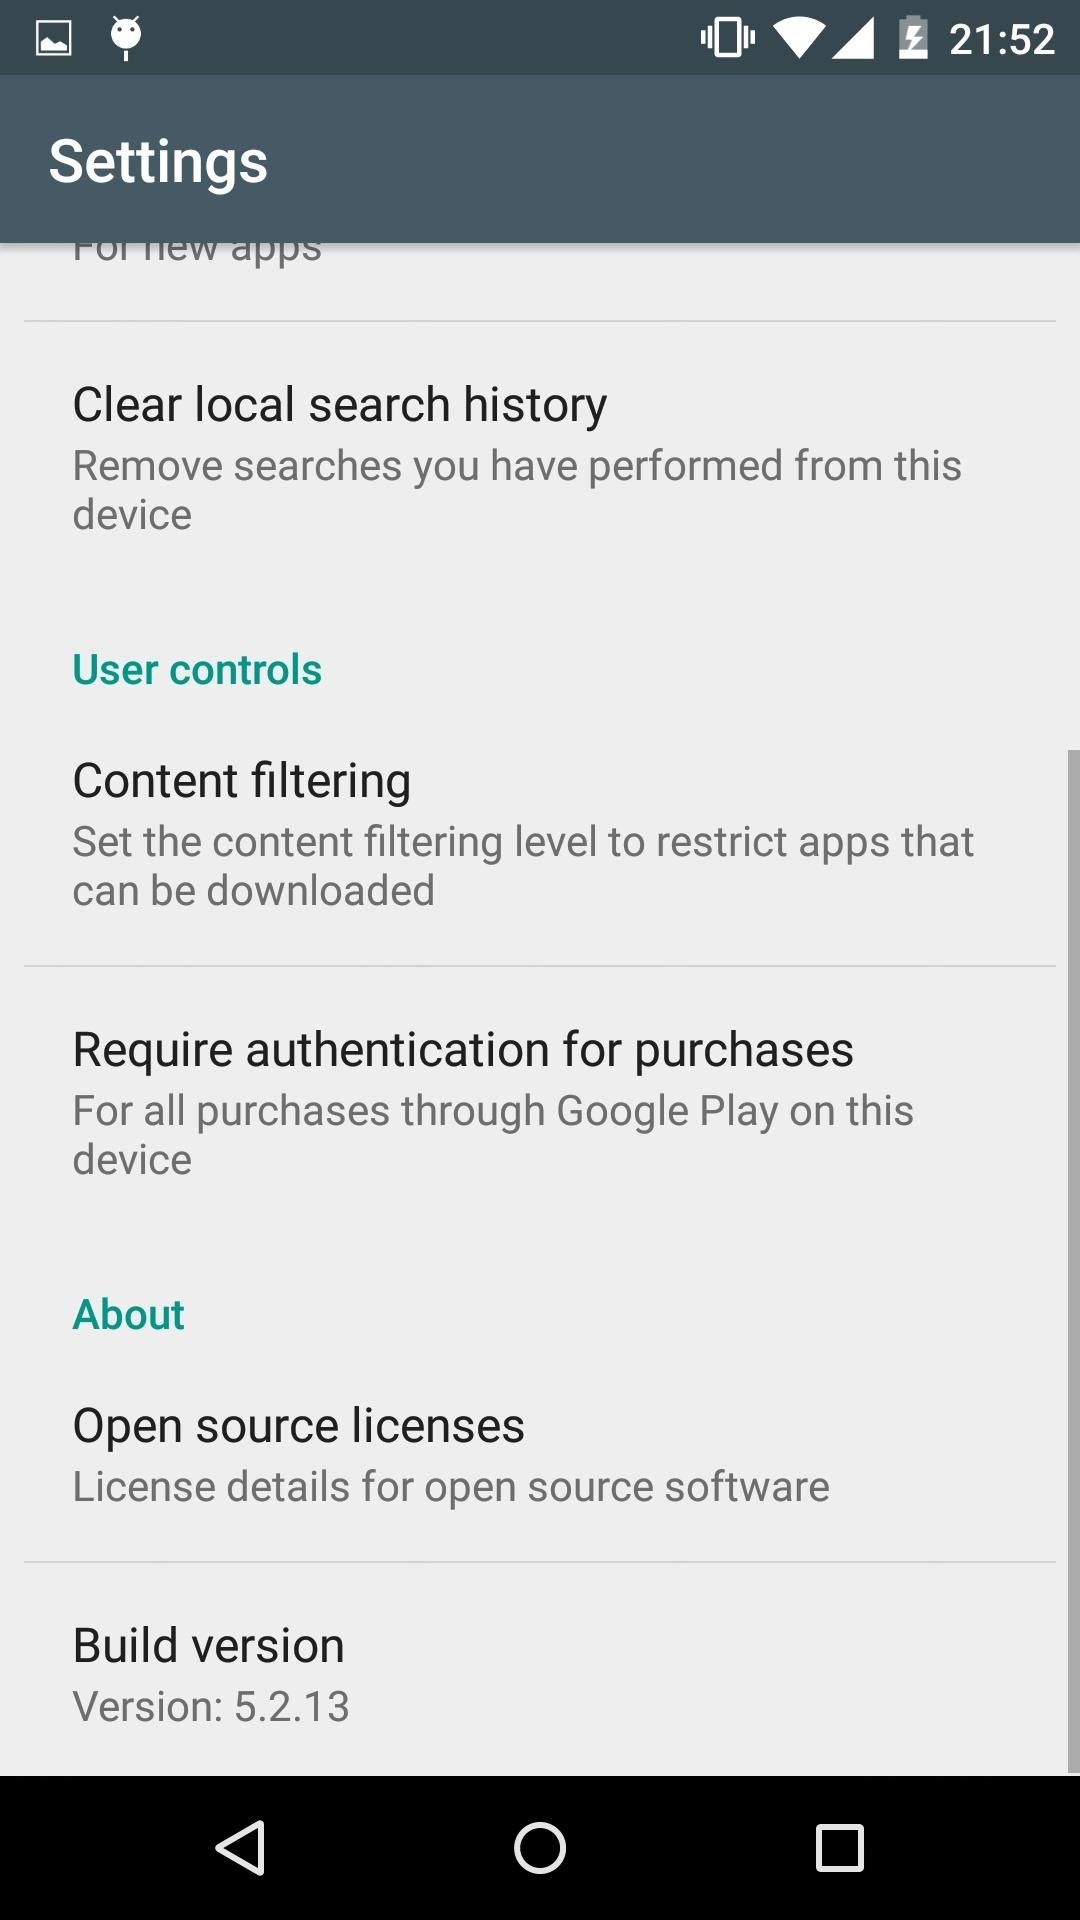 How to Check if Google Play Store Is Up to Date and What Version It Is.